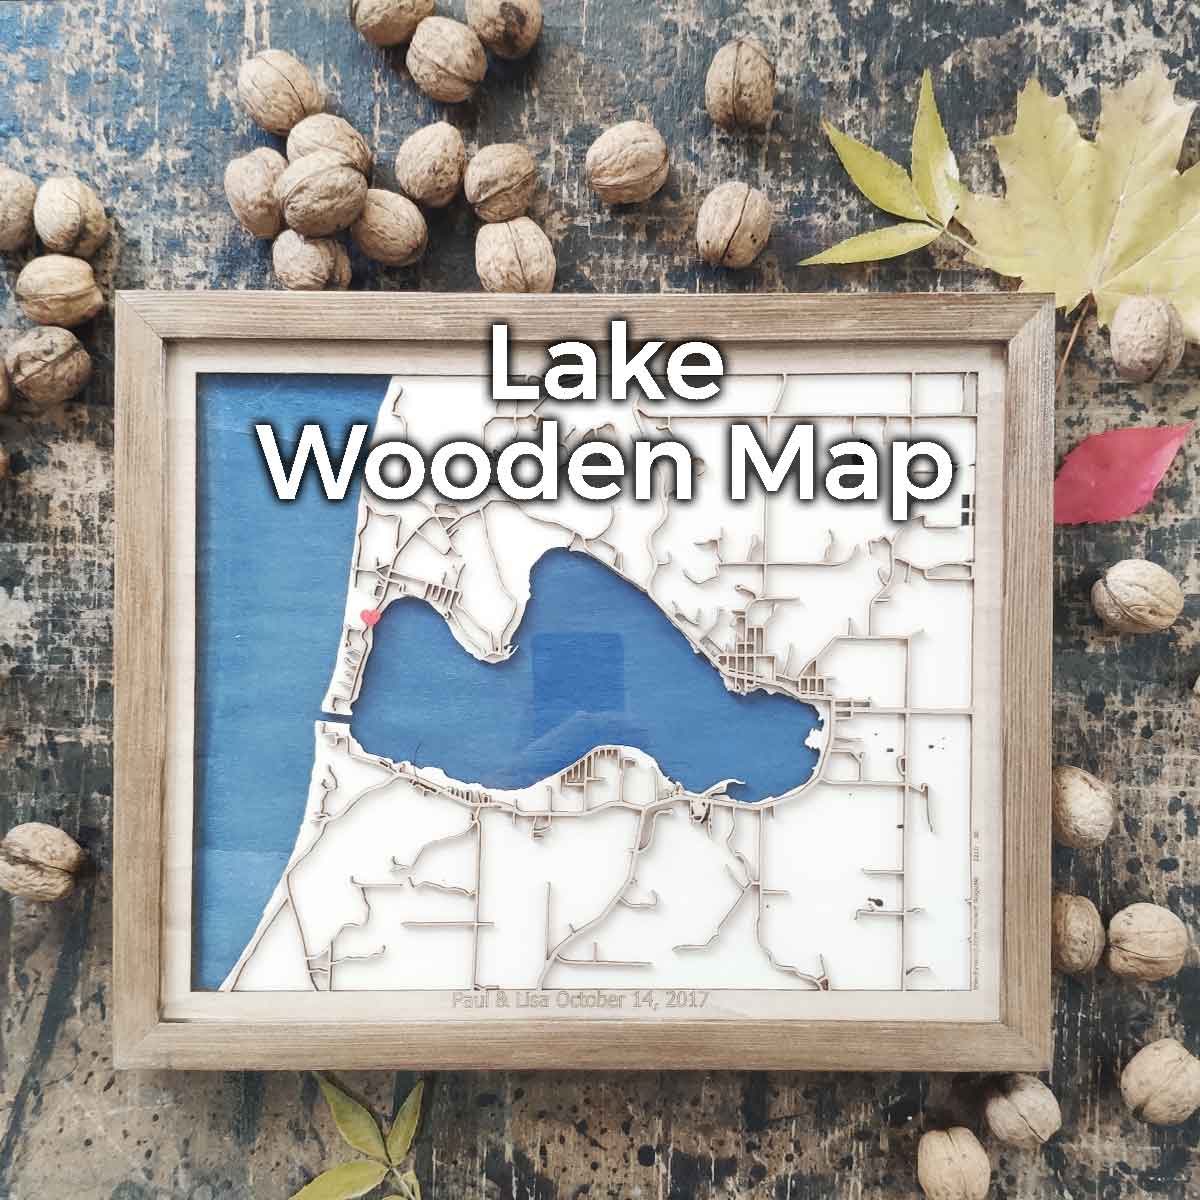 Lake Wooden Map by CityWood - Custom Wood Map Art - Unique Laser Cut Engraved - Anniversary Gift